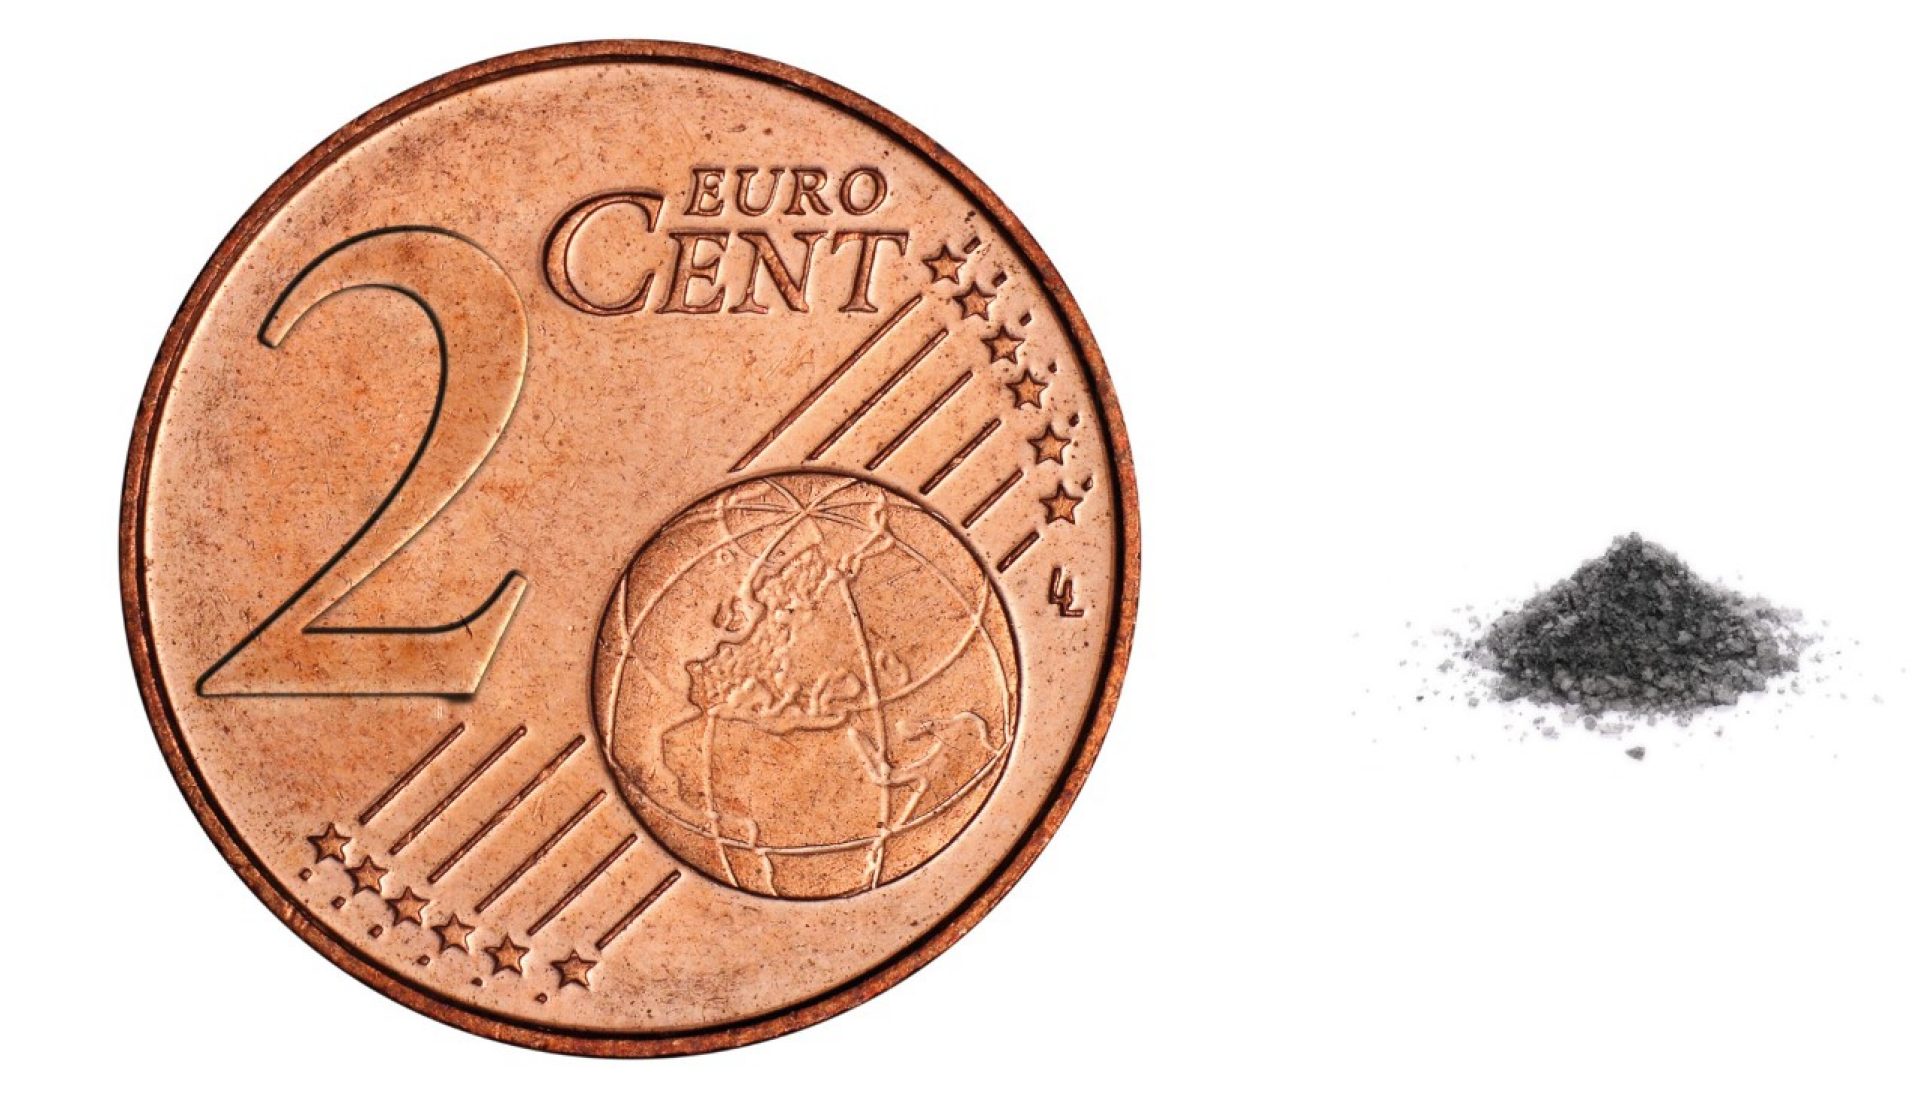 Occupational exposure limits for dust are as low as a pinch of salt or the weight of a 2 cent coin